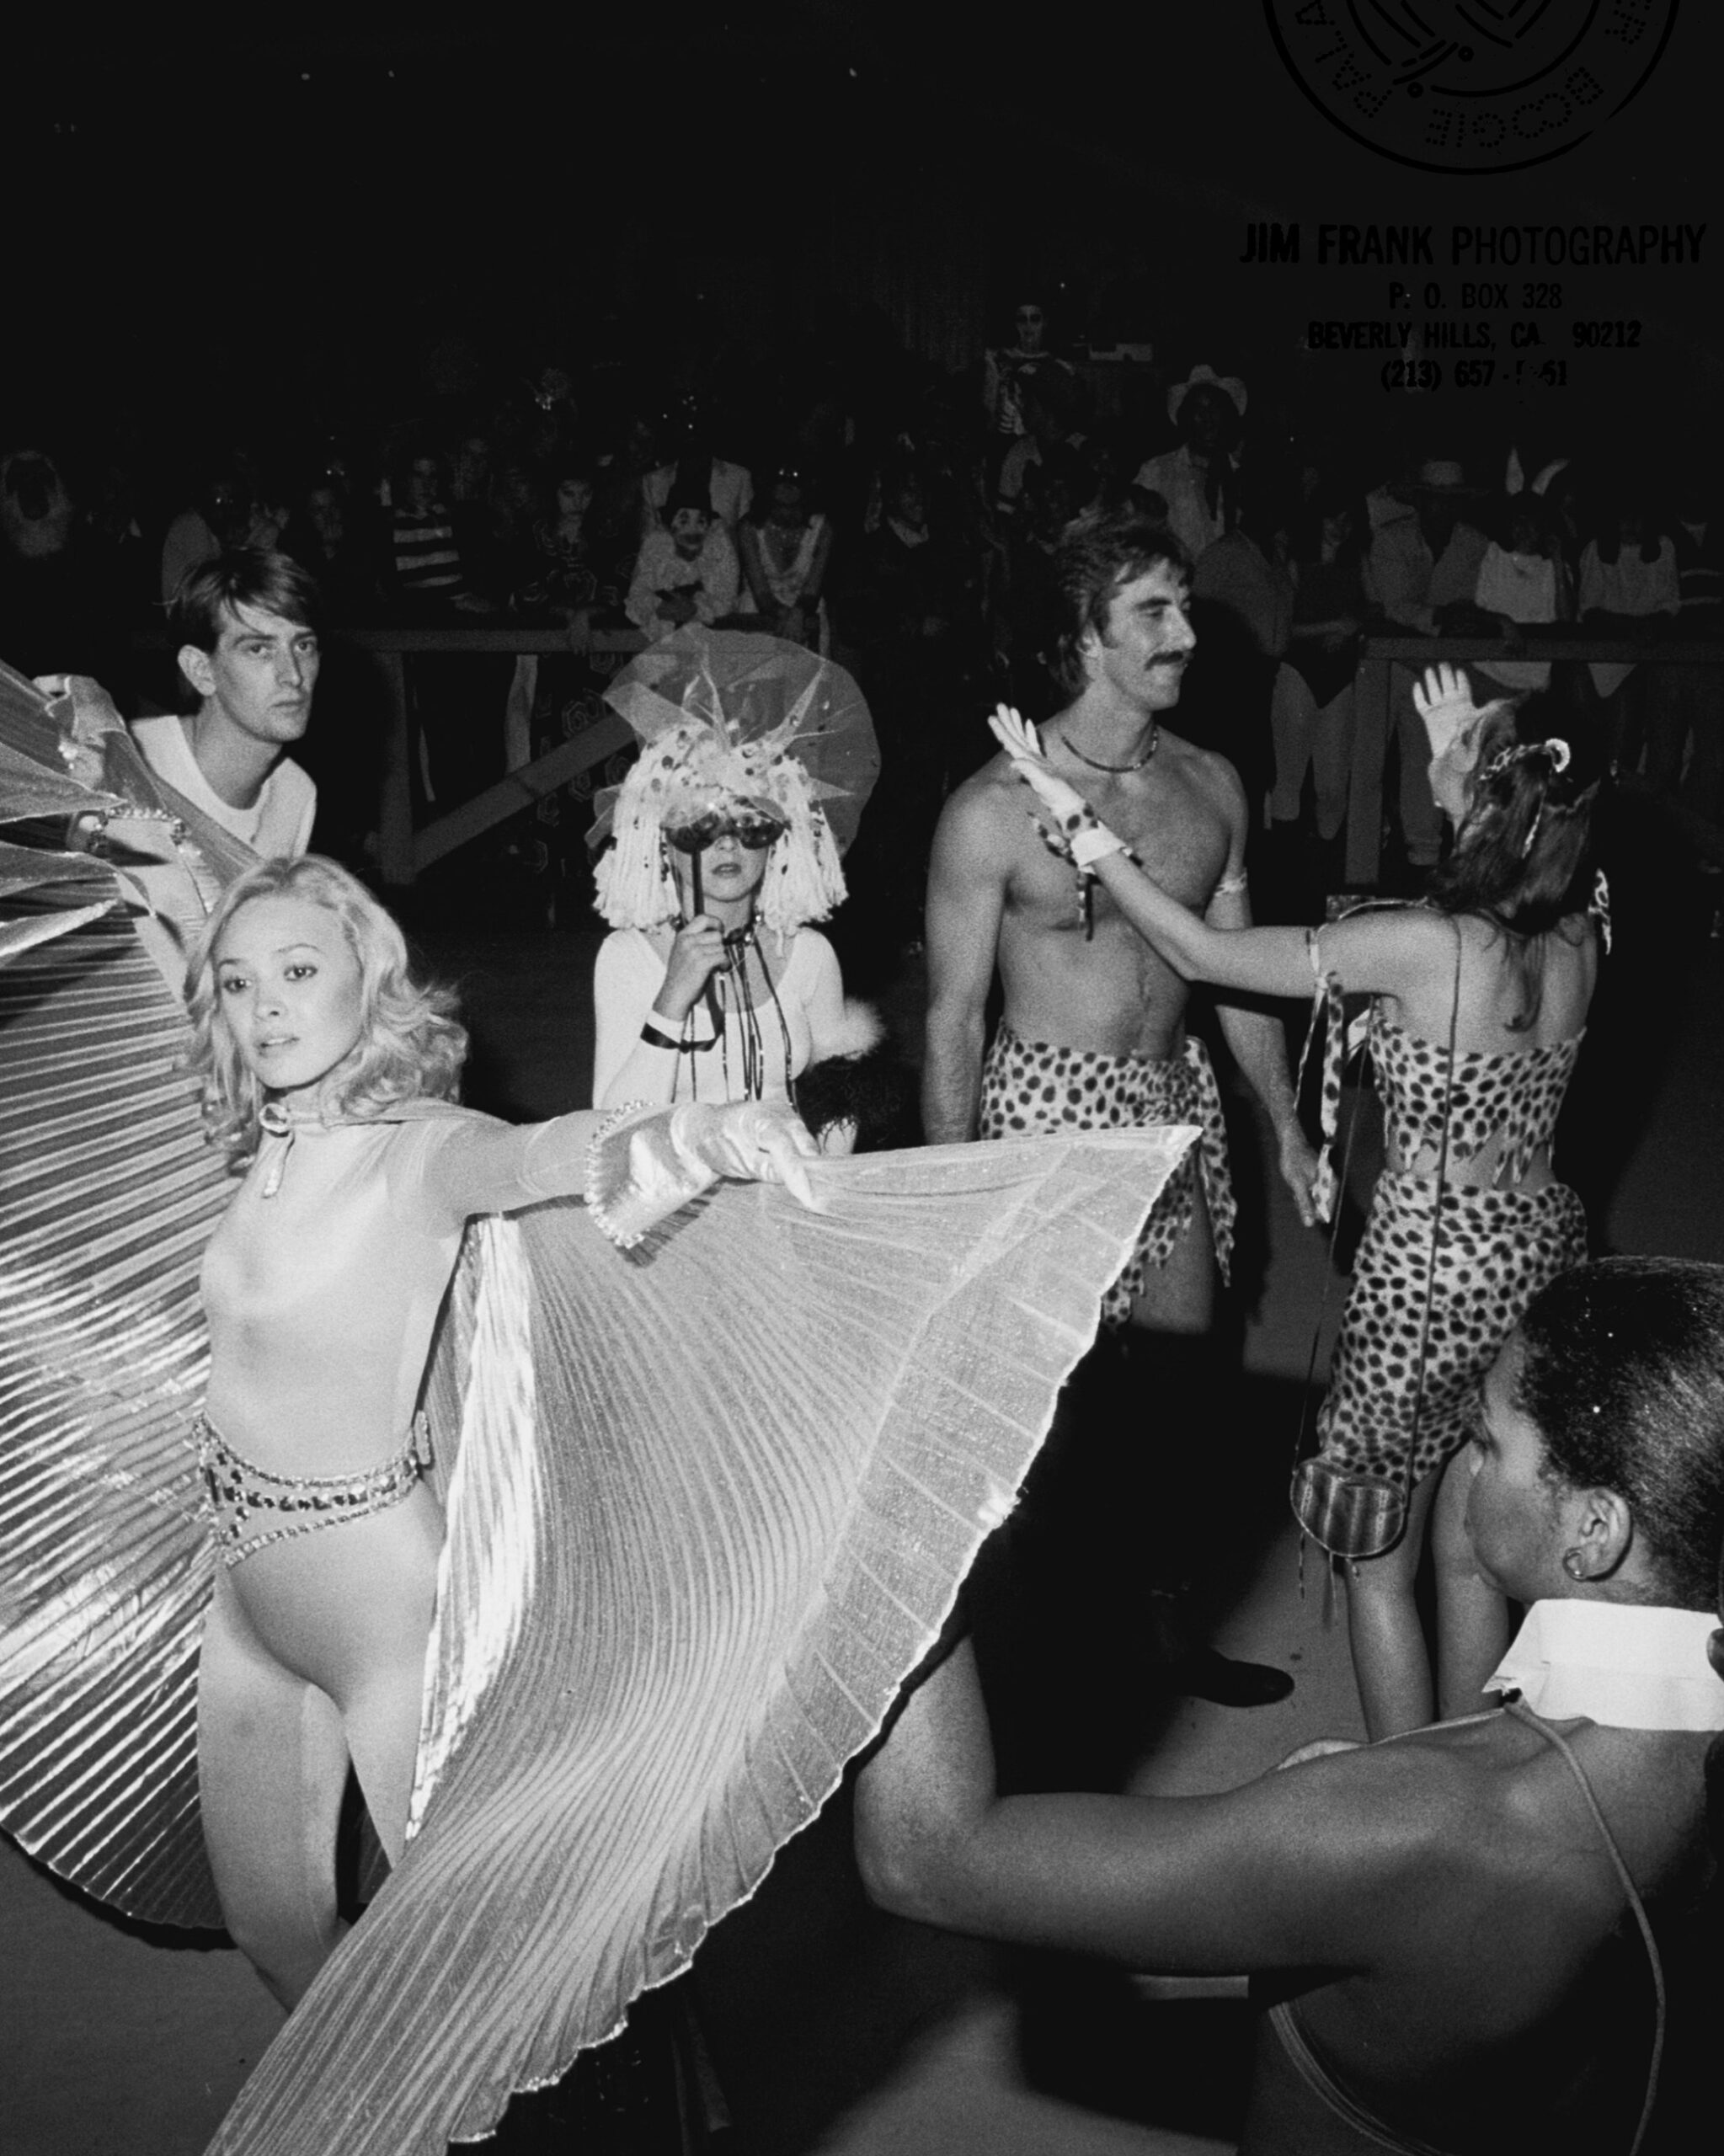 “It Modified into as soon as Studio 54 On Wheels”: A Unusual E book Captures the Magic of Los Angeles’s Most Superstar-Studded Eighties Curler Rink